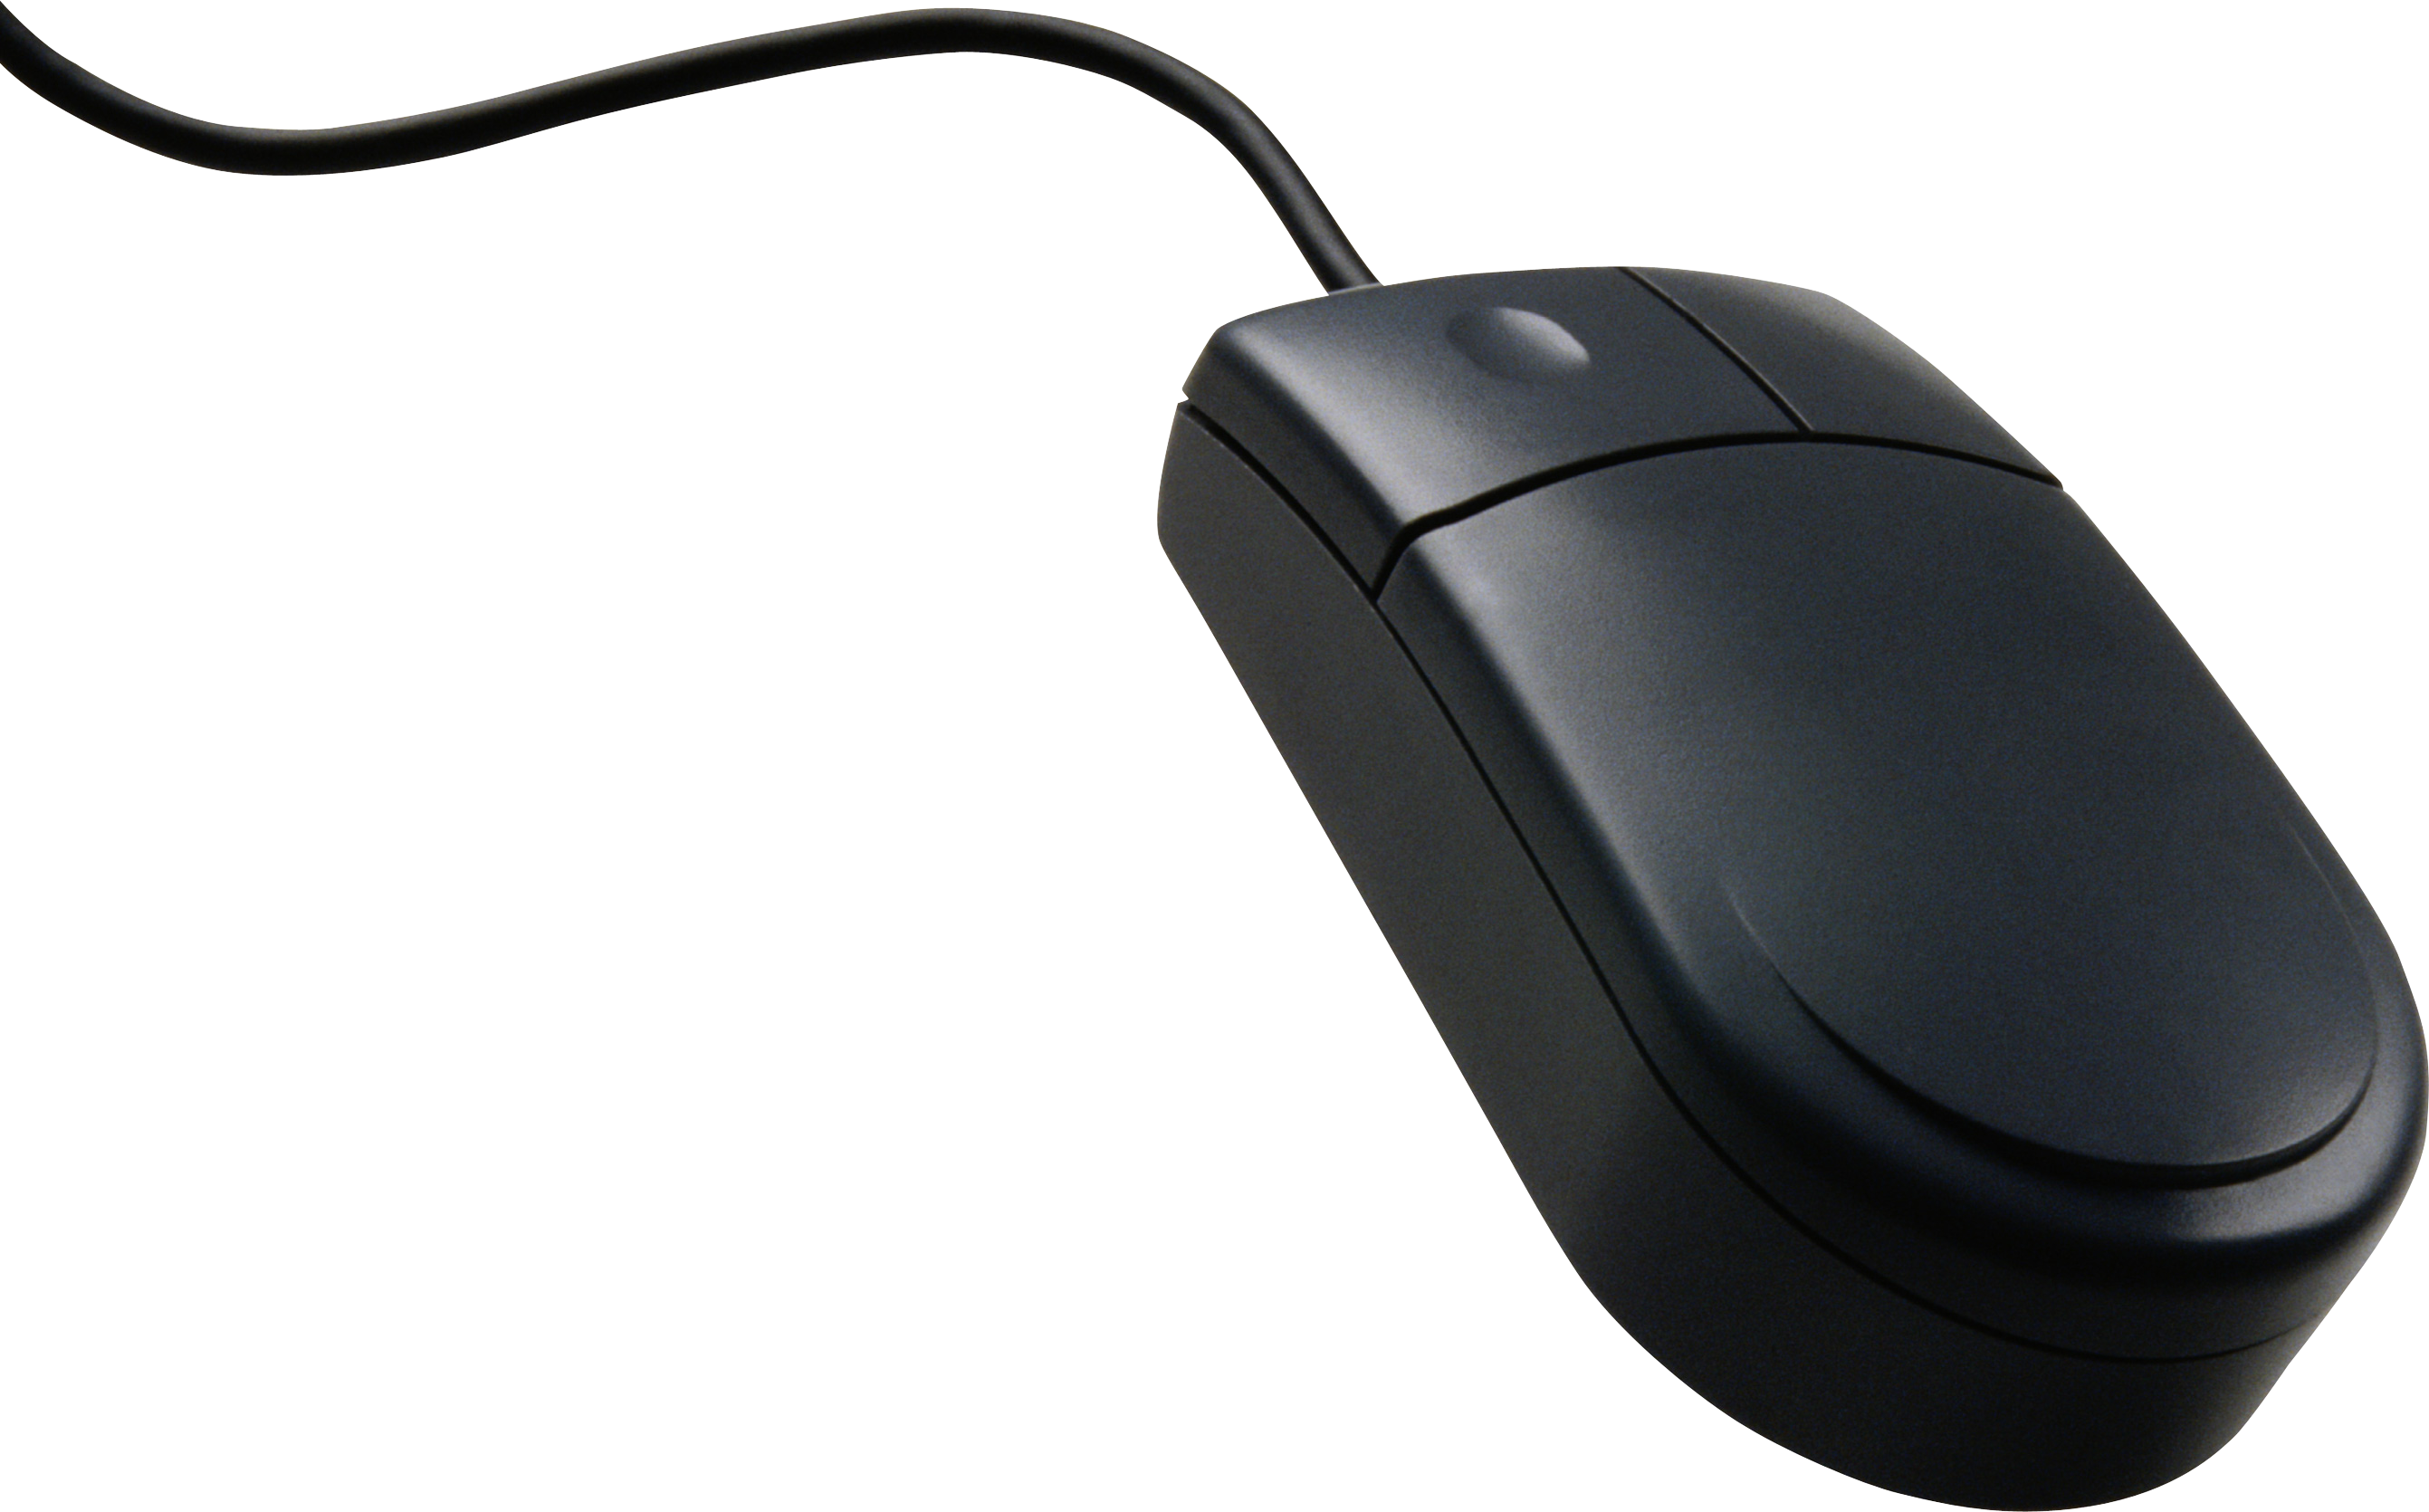 PC Mouse PNG Image